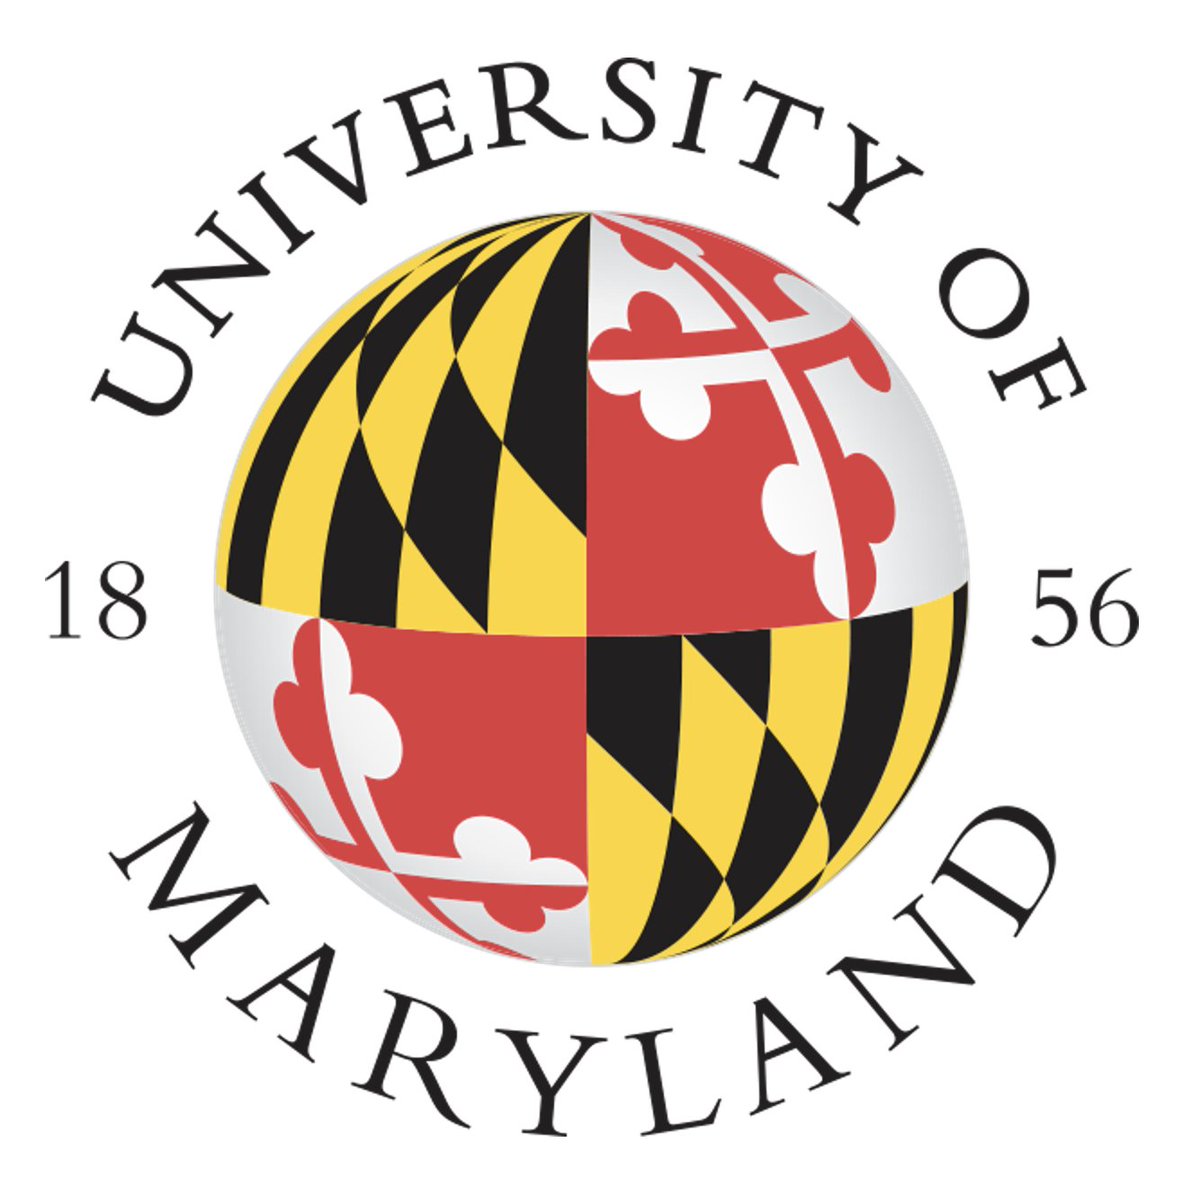 all righty, time for an update... I'm thrilled to announce that I've joined the University of Maryland @UMDPublicHealth as an Assistant Professor in the Department of Health Policy & Management! Really excited to join this stellar faculty! new email is nca at umd dot edu.